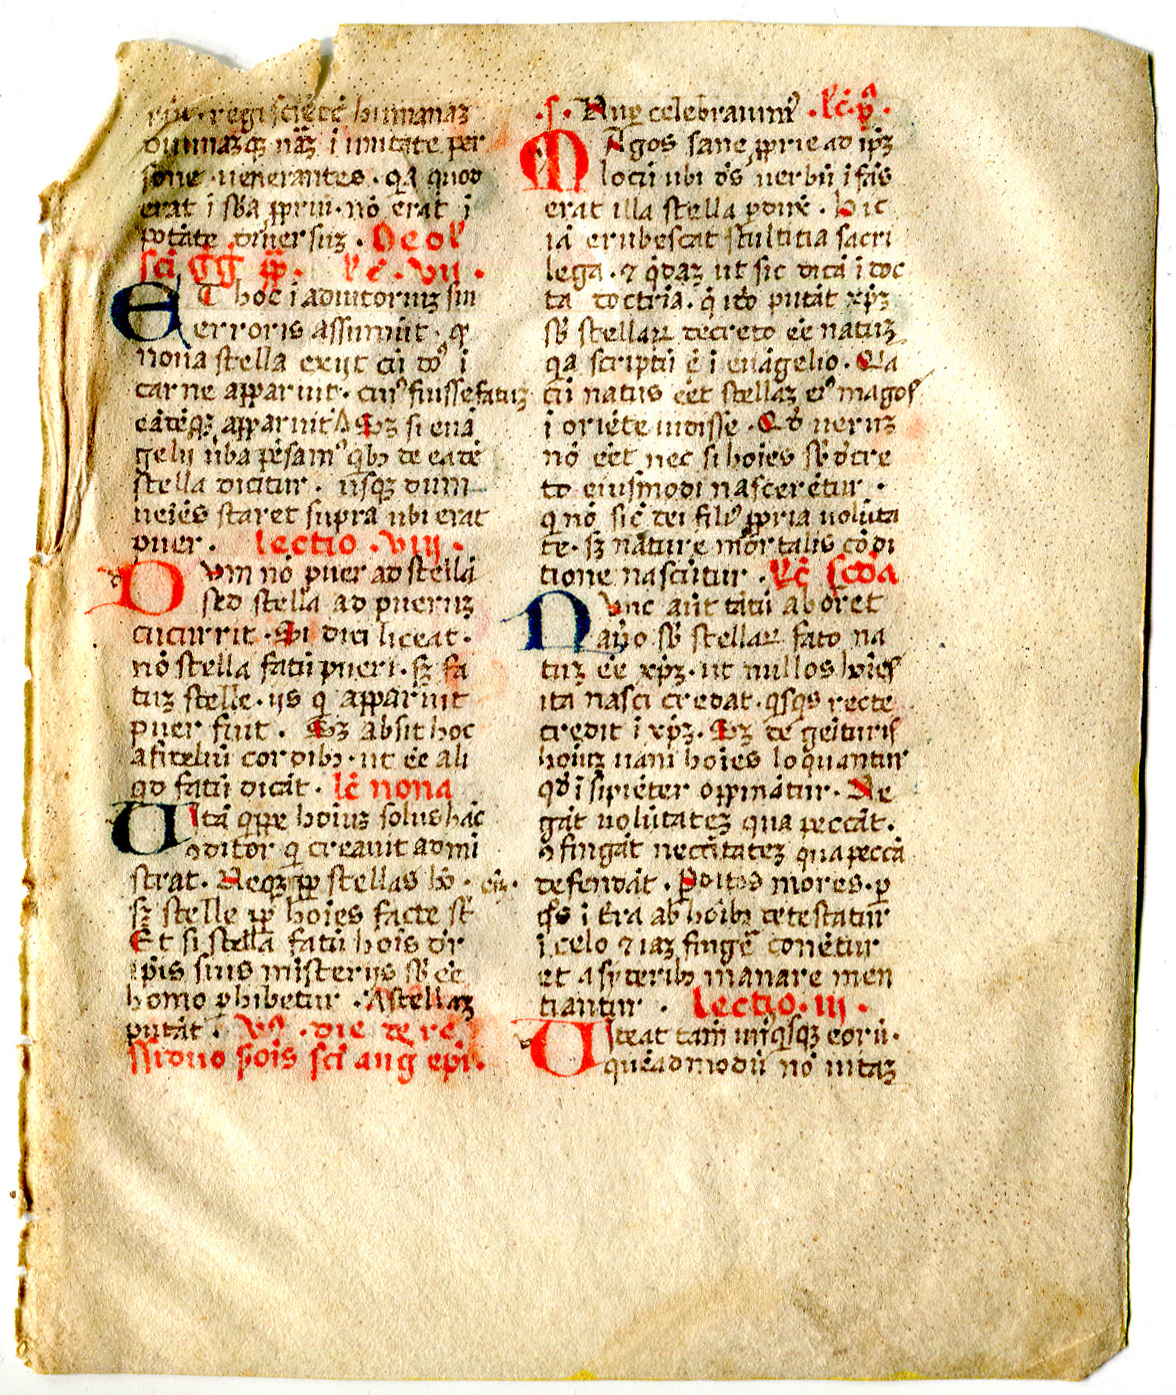 First recto of the two leaves with patristic lections. Reproduced by permission.